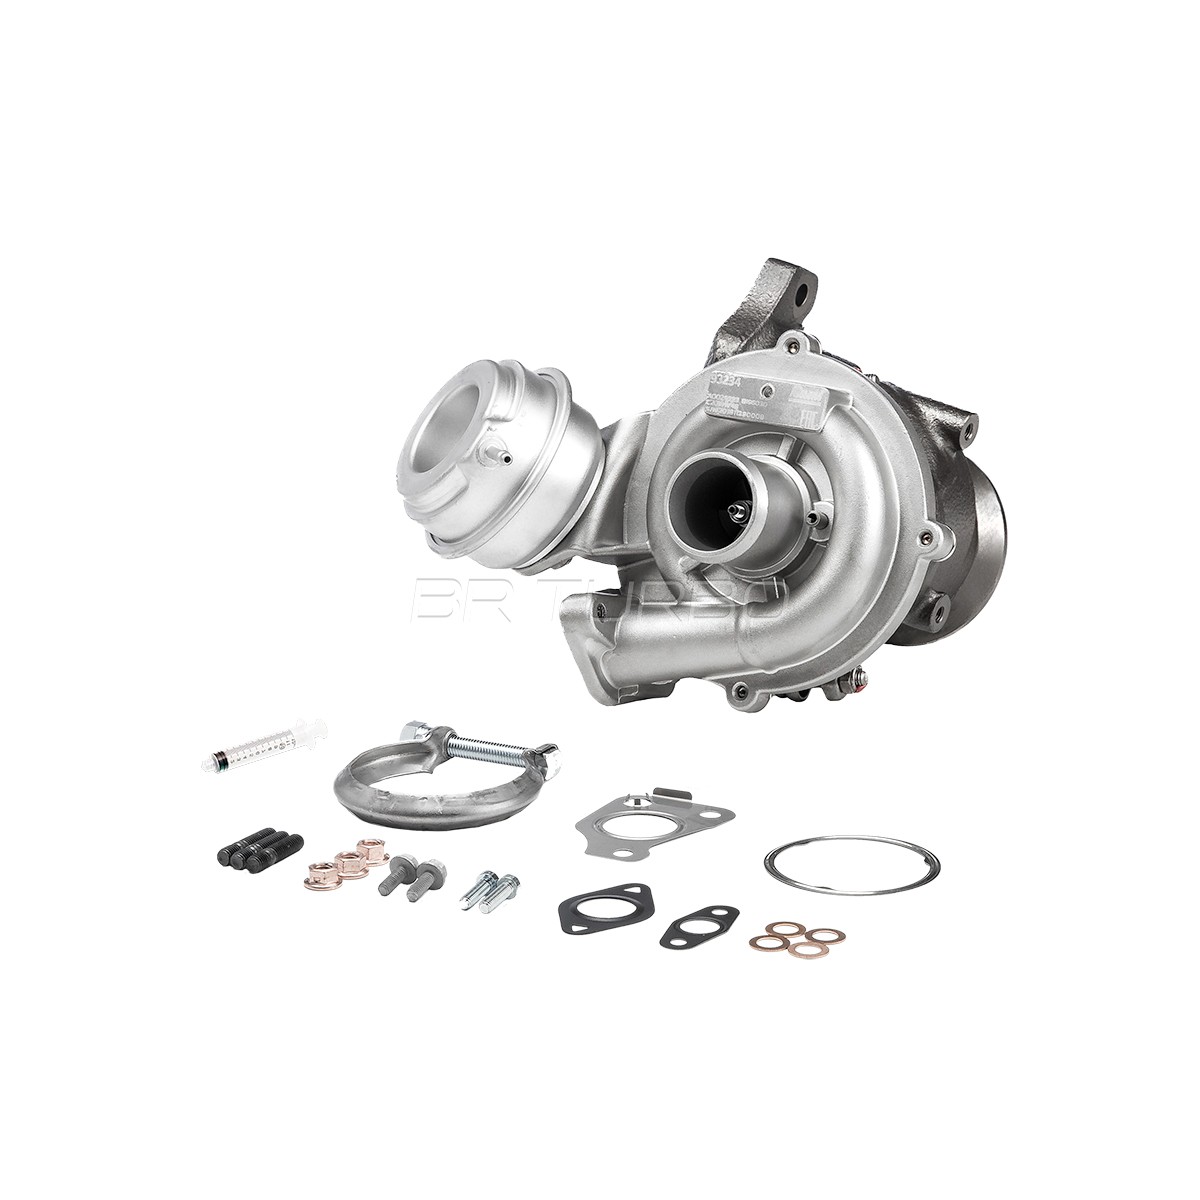 7991715001RSM Turbocharger REMANUFACTURED TURBOCHARGER WITH MOUNTING KIT BR Turbo 799171-5001RSM review and test